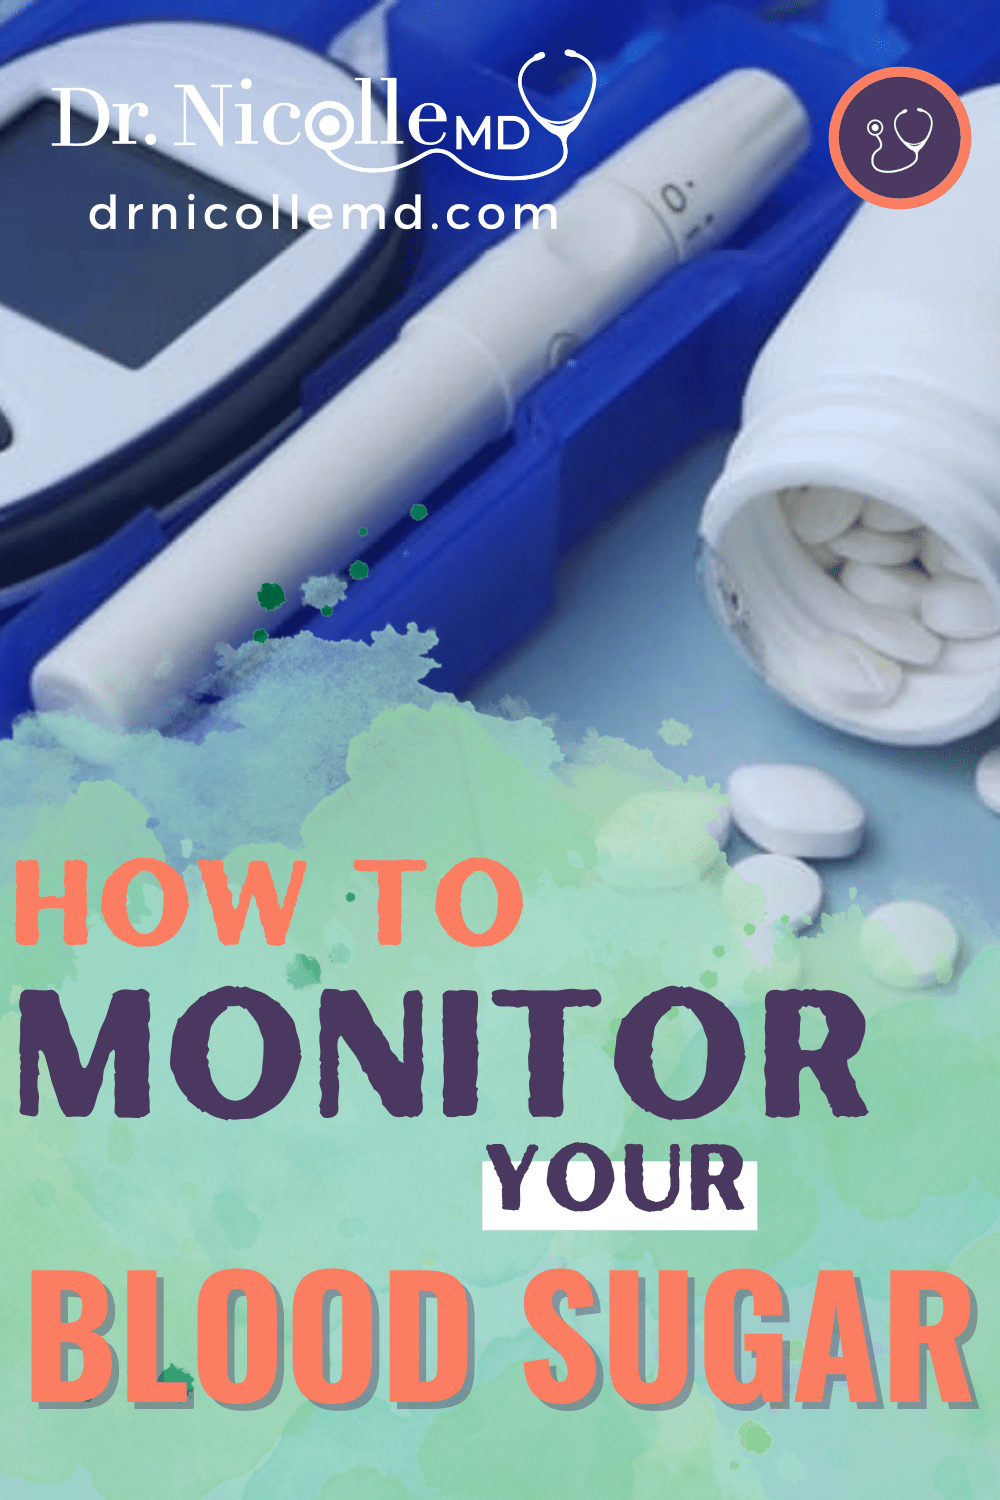 How to Monitor Your Blood Sugar